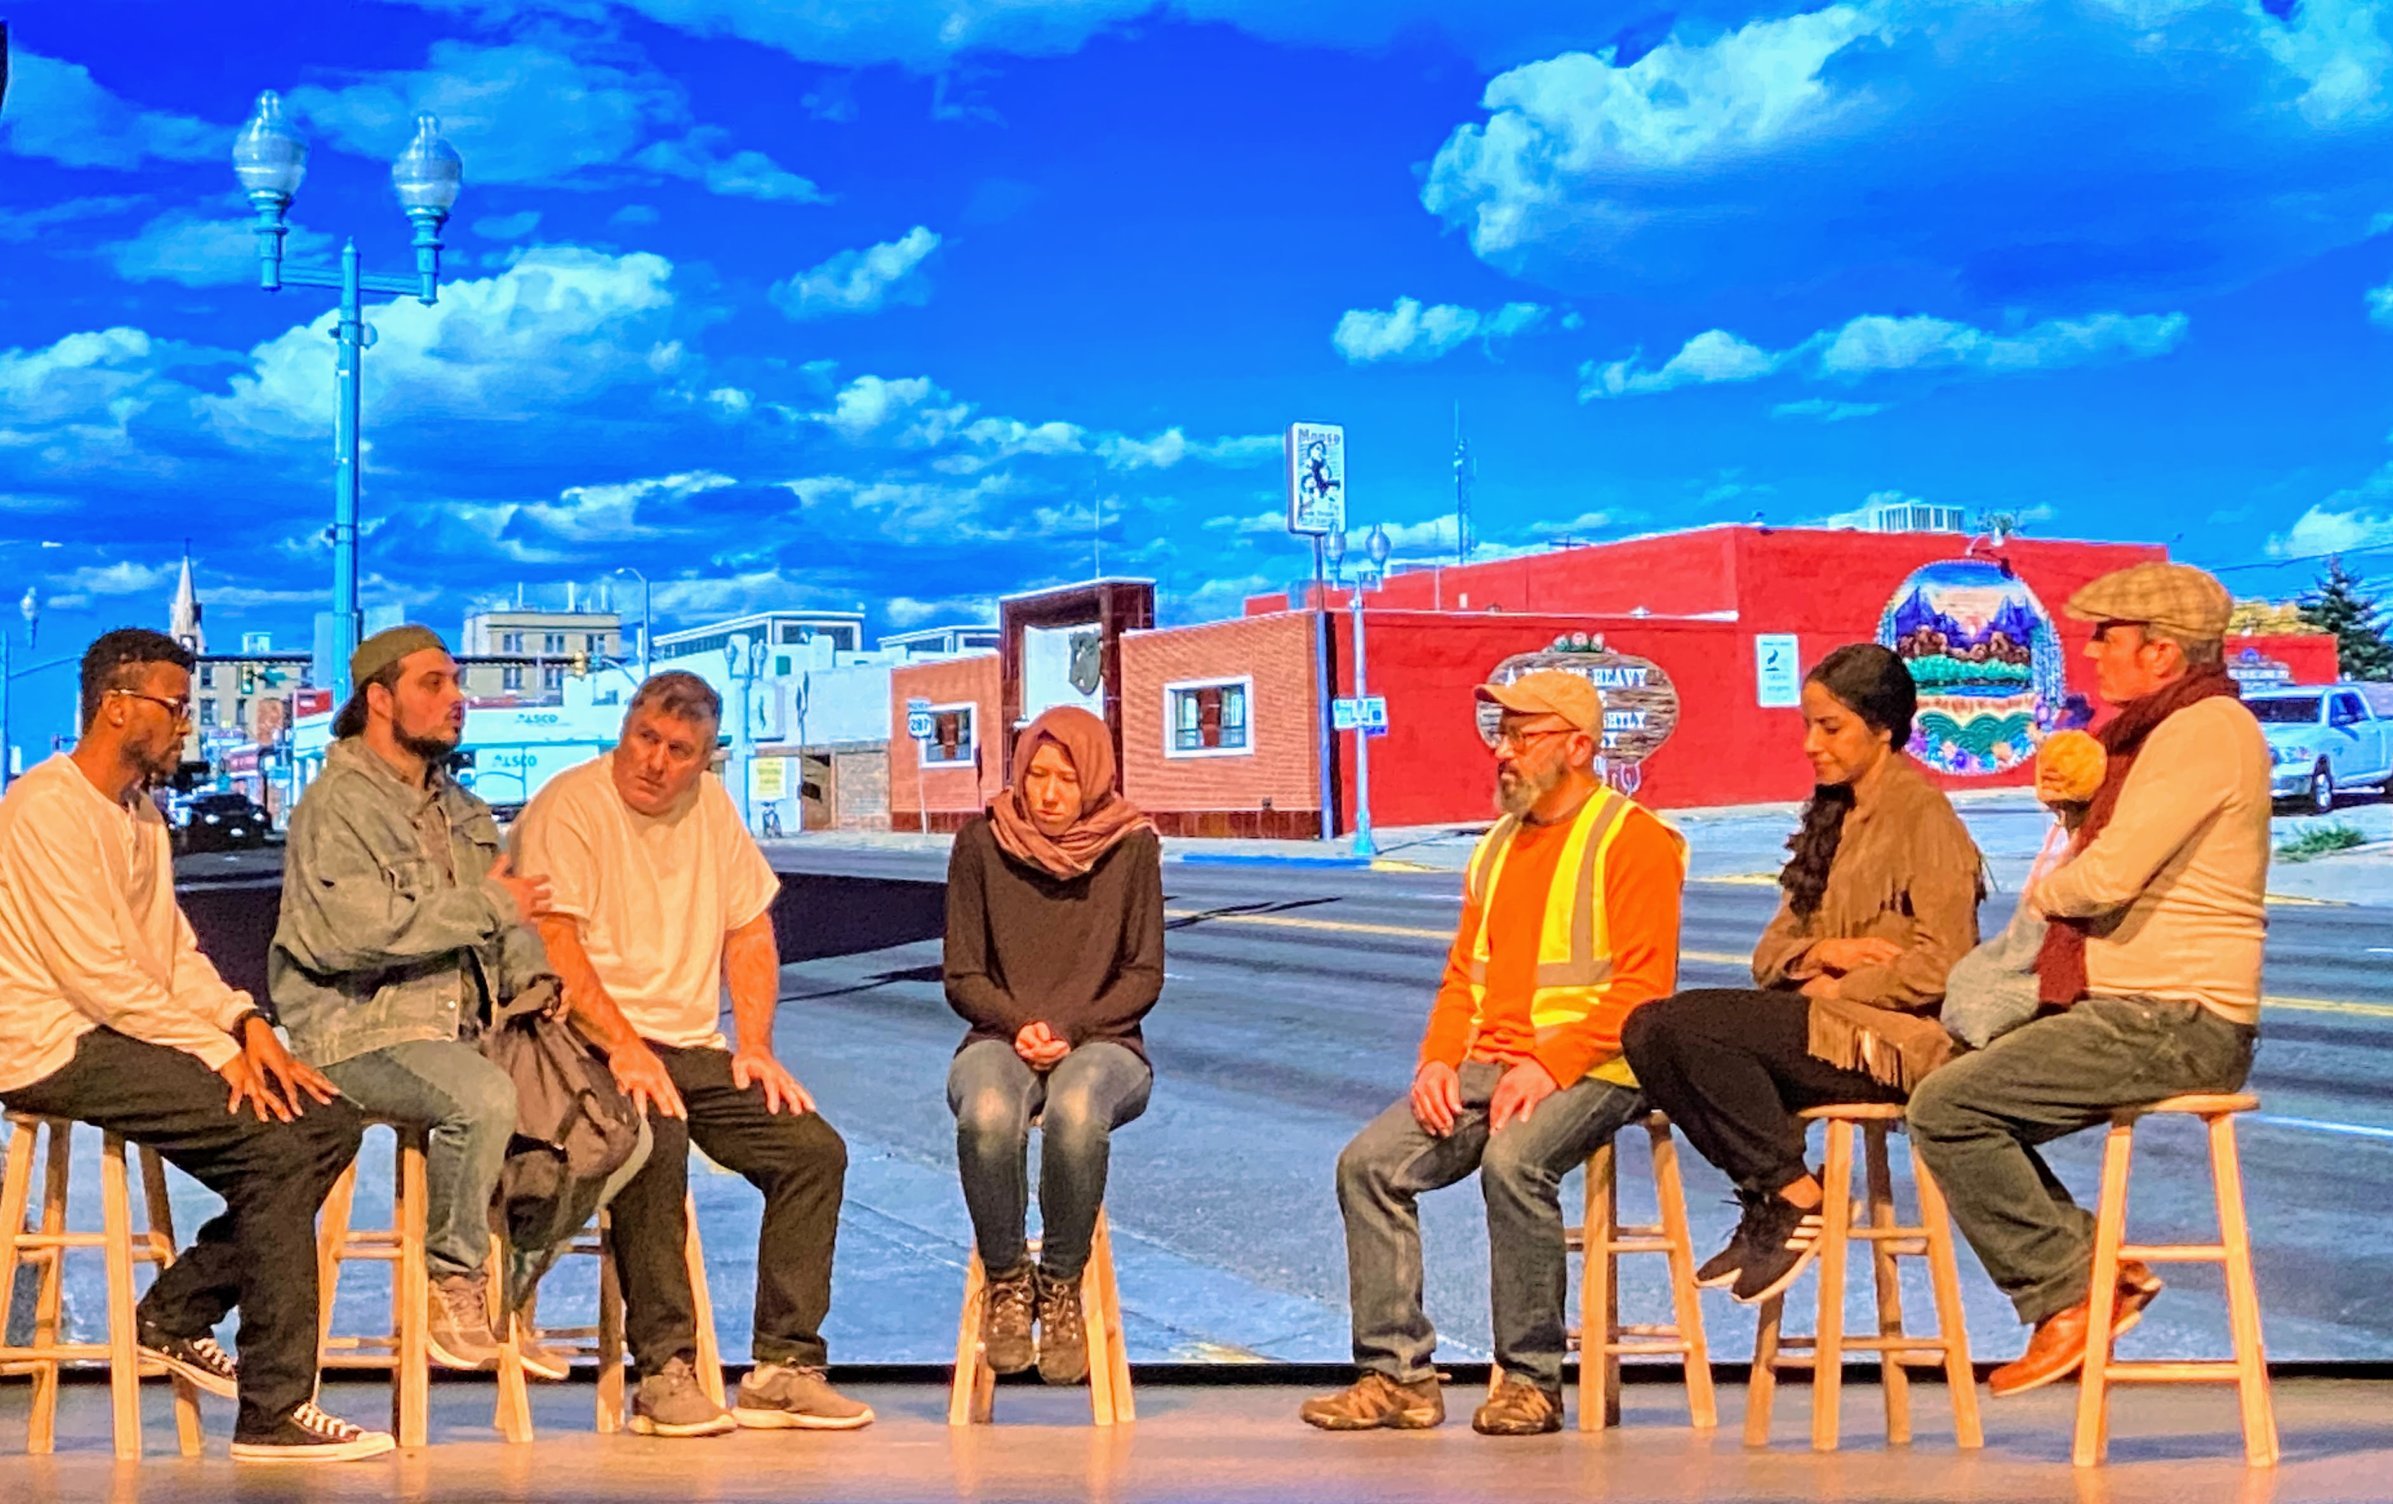 "The Laramie Project" at North Fork Community Theatre